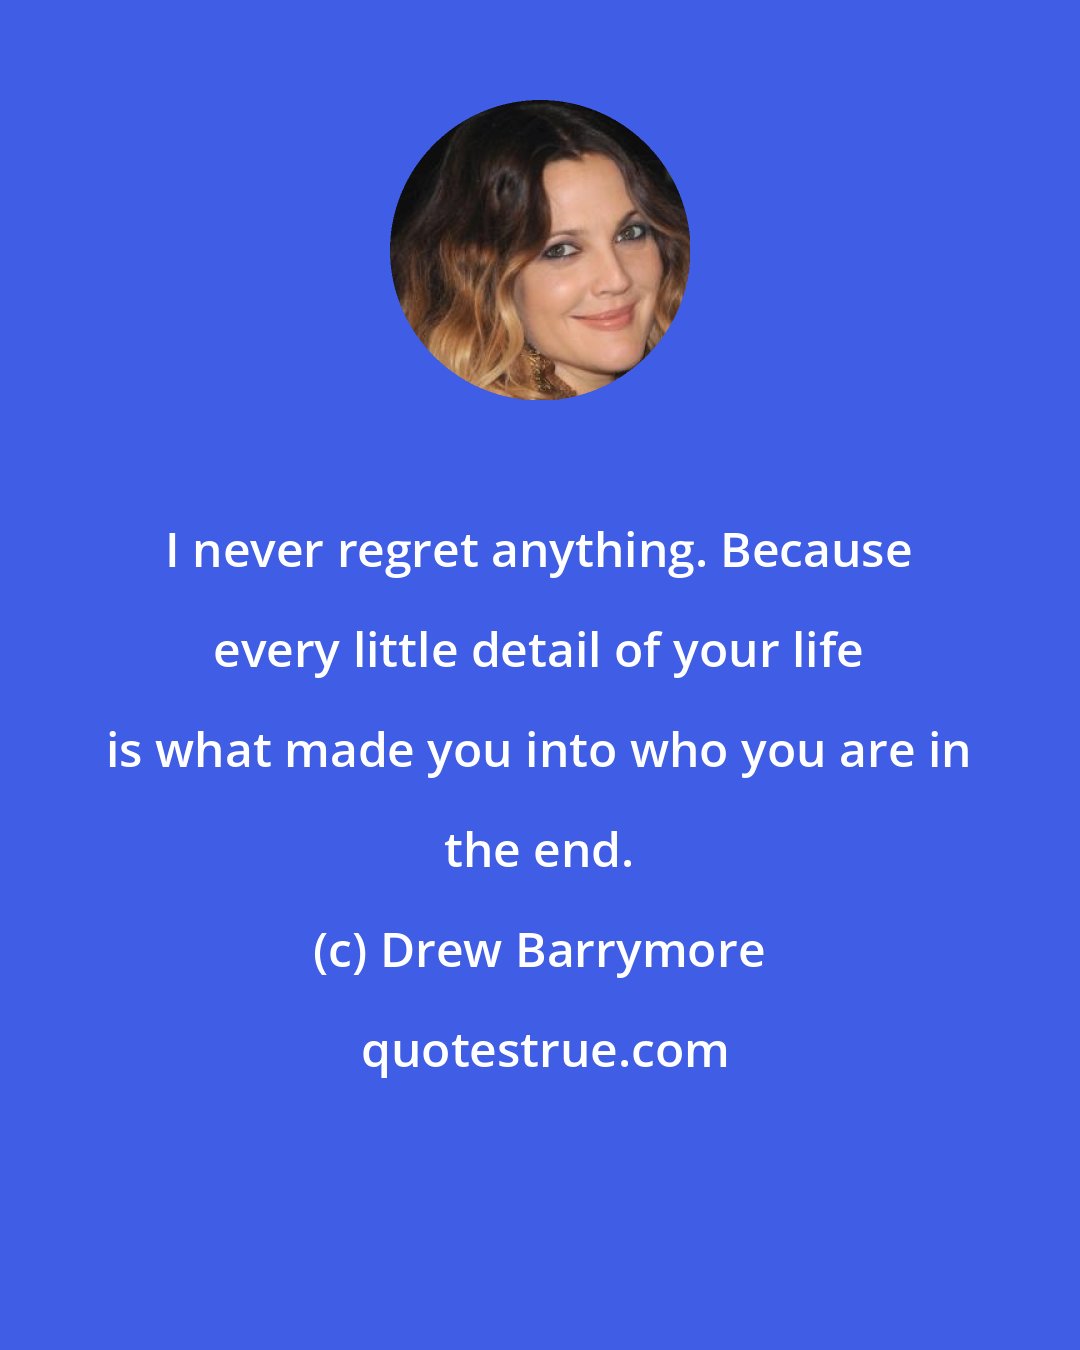 Drew Barrymore: I never regret anything. Because every little detail of your life is what made you into who you are in the end.